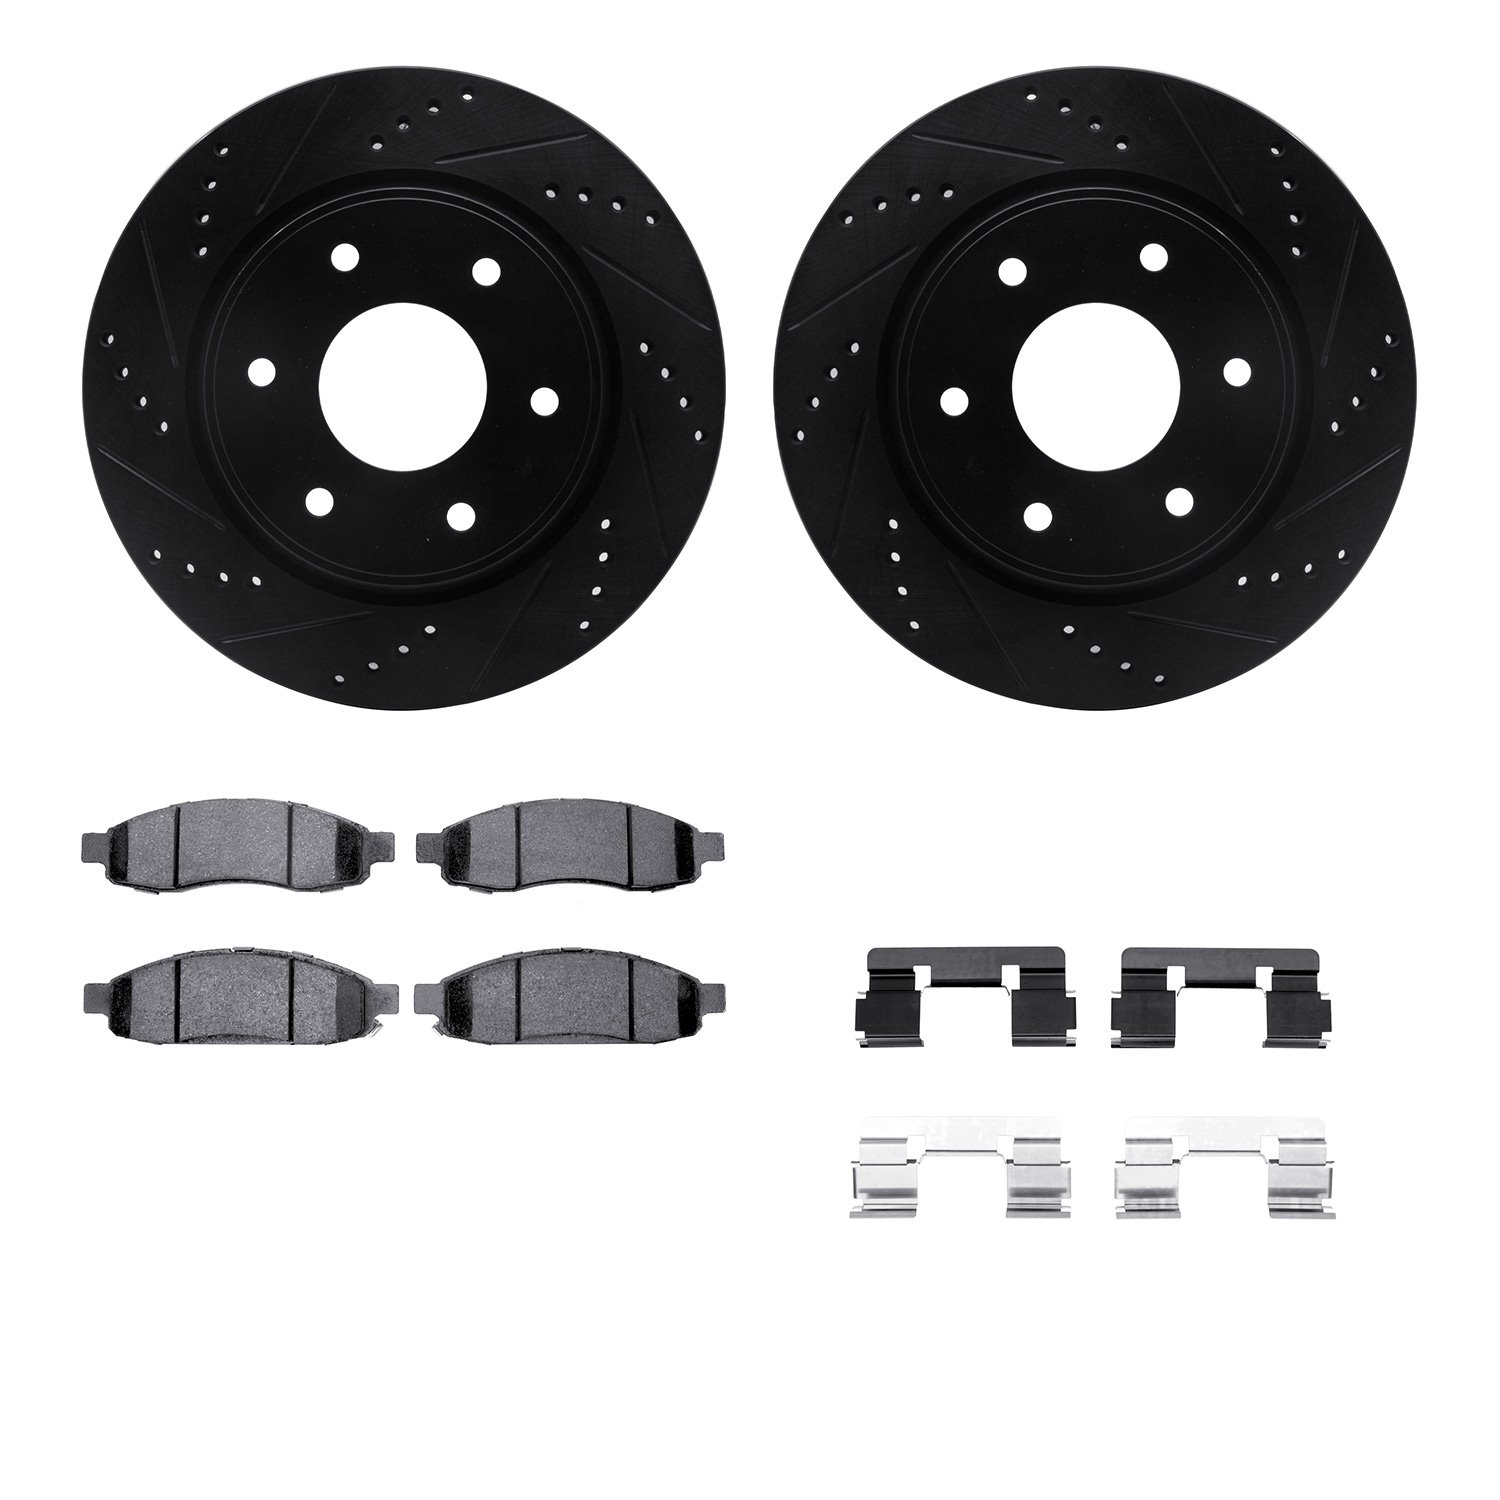 8412-67003 Drilled/Slotted Brake Rotors with Ultimate-Duty Brake Pads Kit & Hardware [Black], 2005-2007 Infiniti/Nissan, Positio